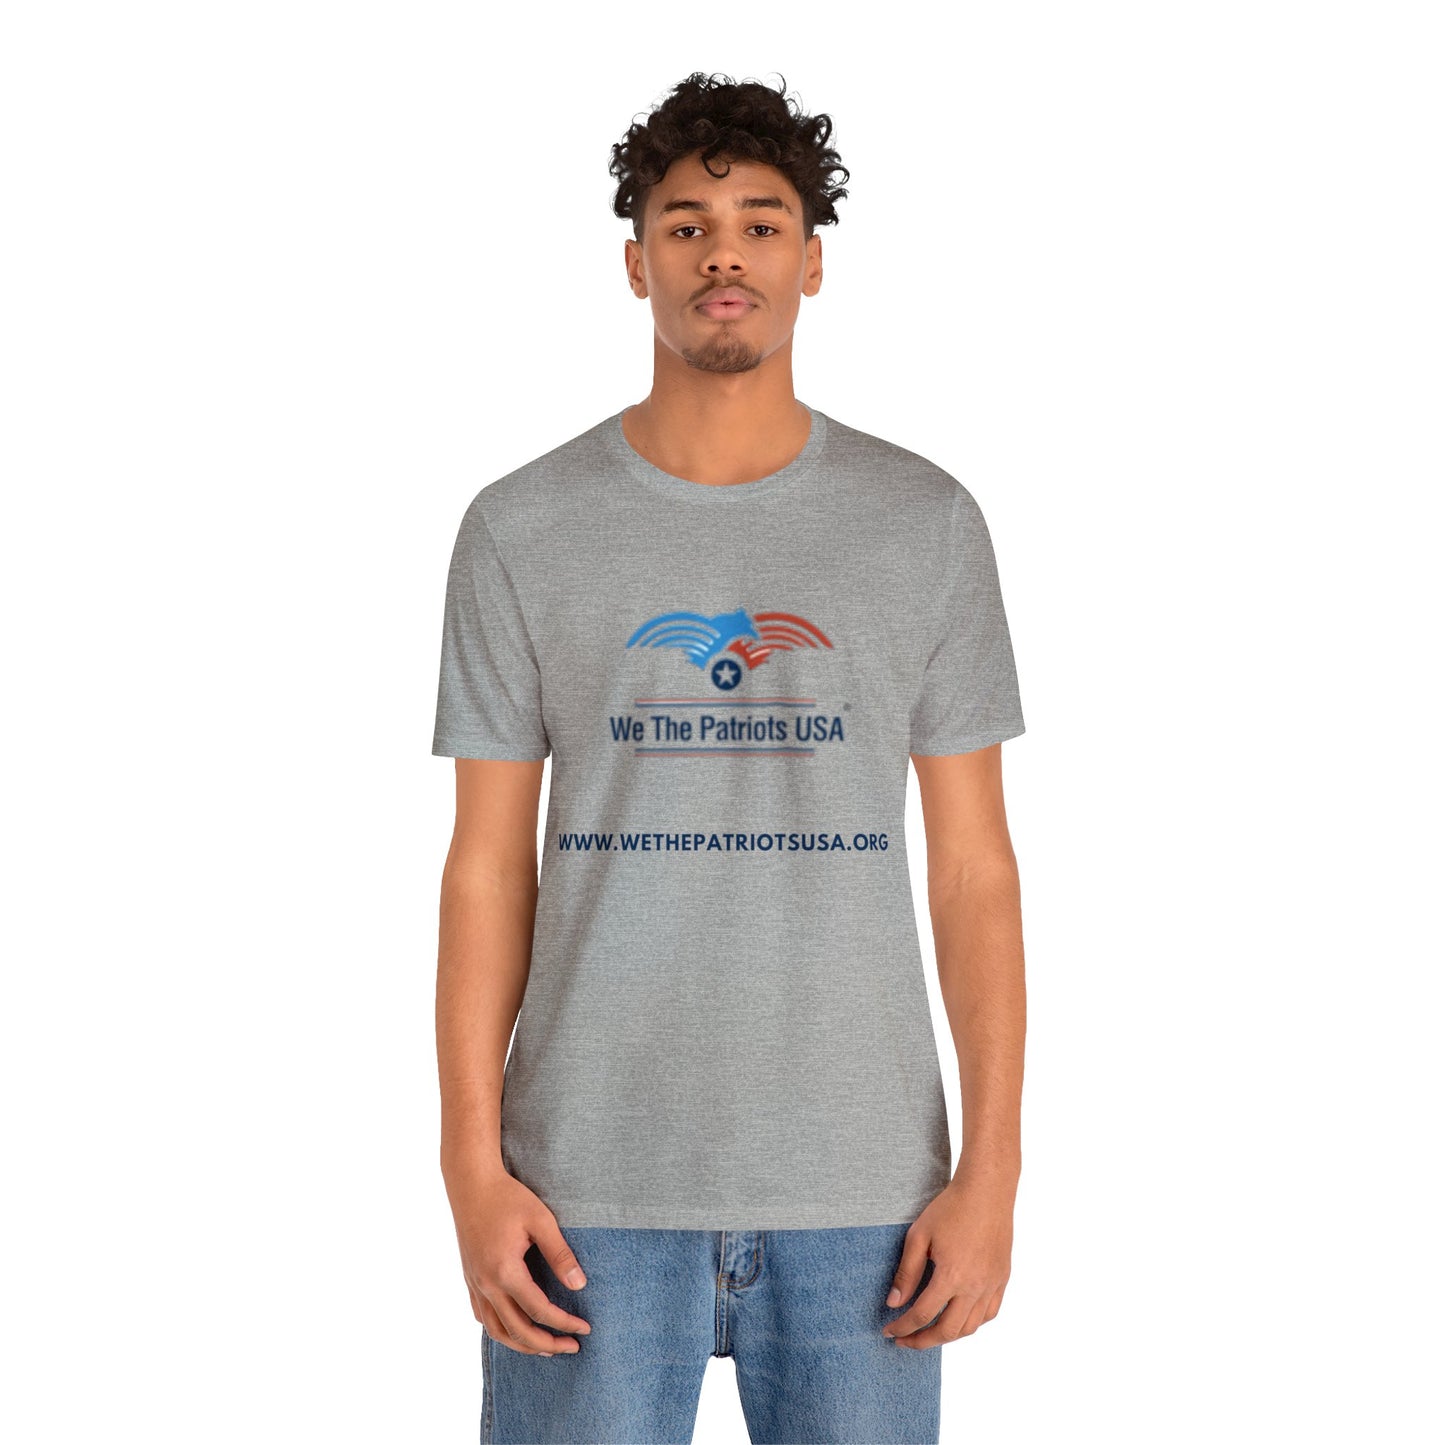 Men's Stand up to Tyranny Shirt